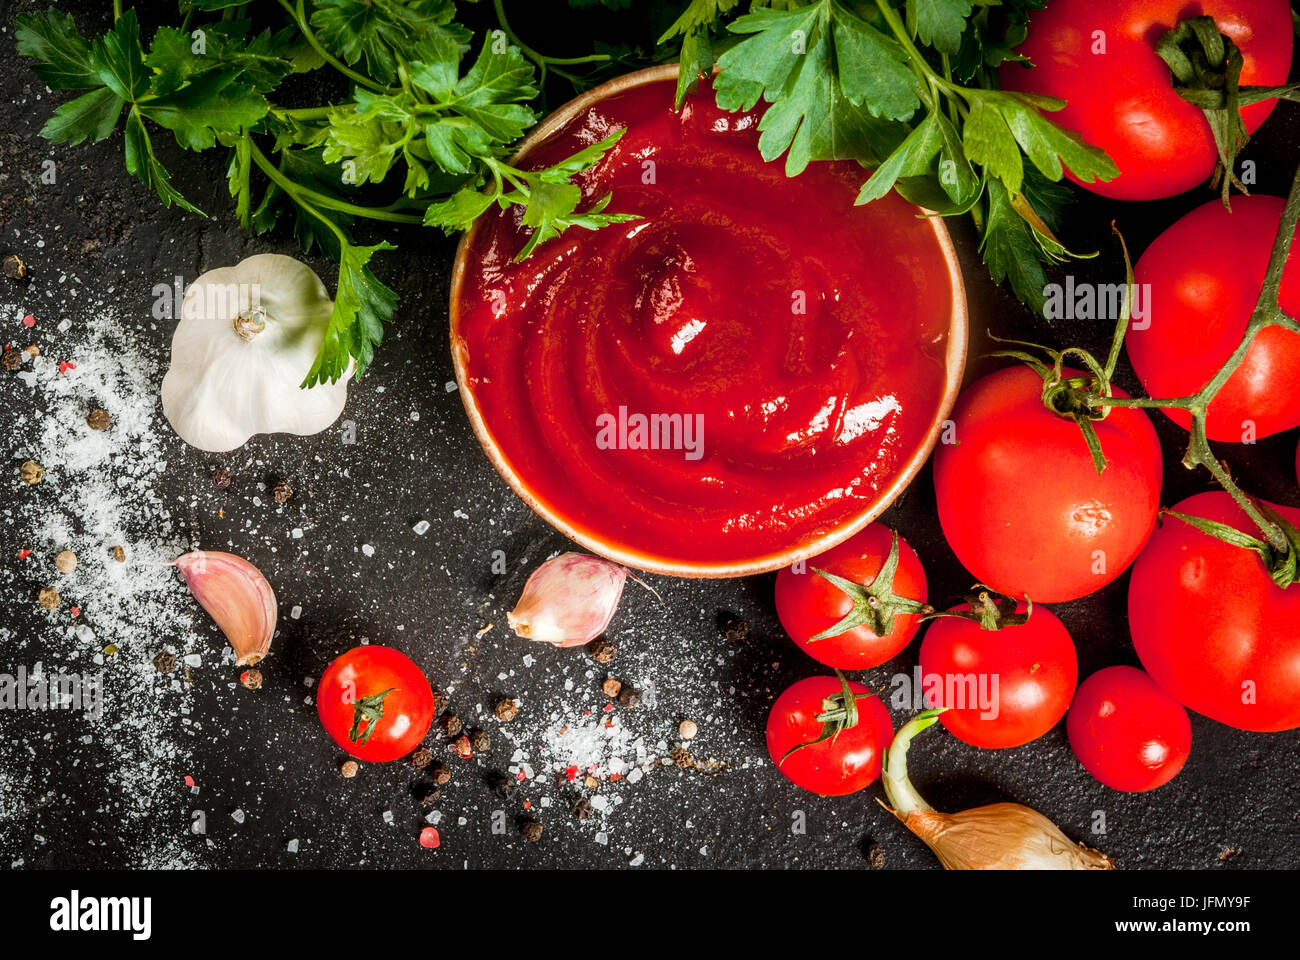 Fresh homemade organic tomato sauce or ketchup, in a small bowl. With the ingredients - parsley, onions, garlic, tomatoes, salt, pepper. On a black st Stock Photo